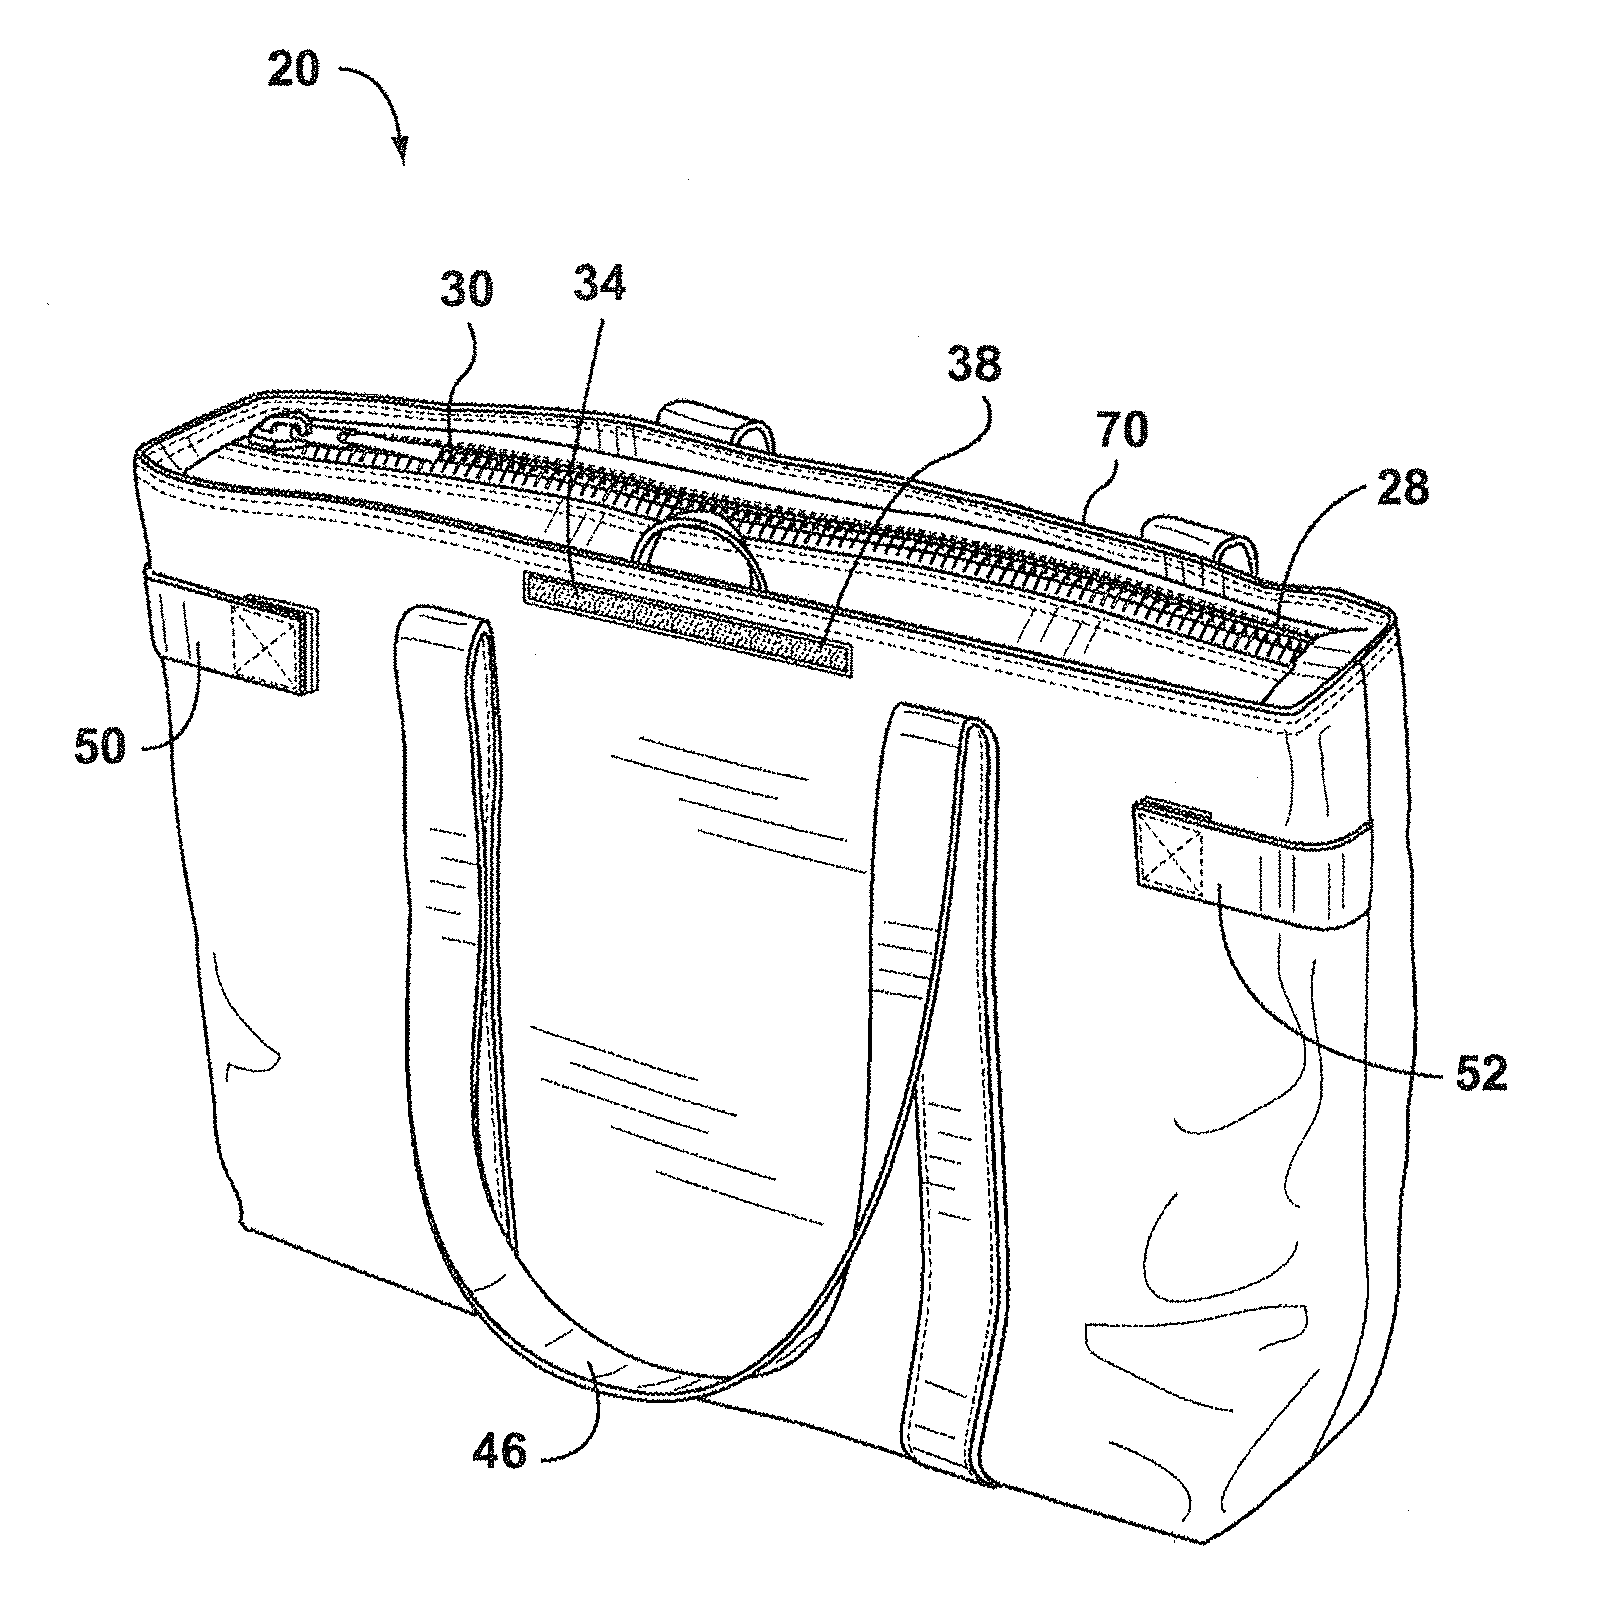 Foldable insulated bag